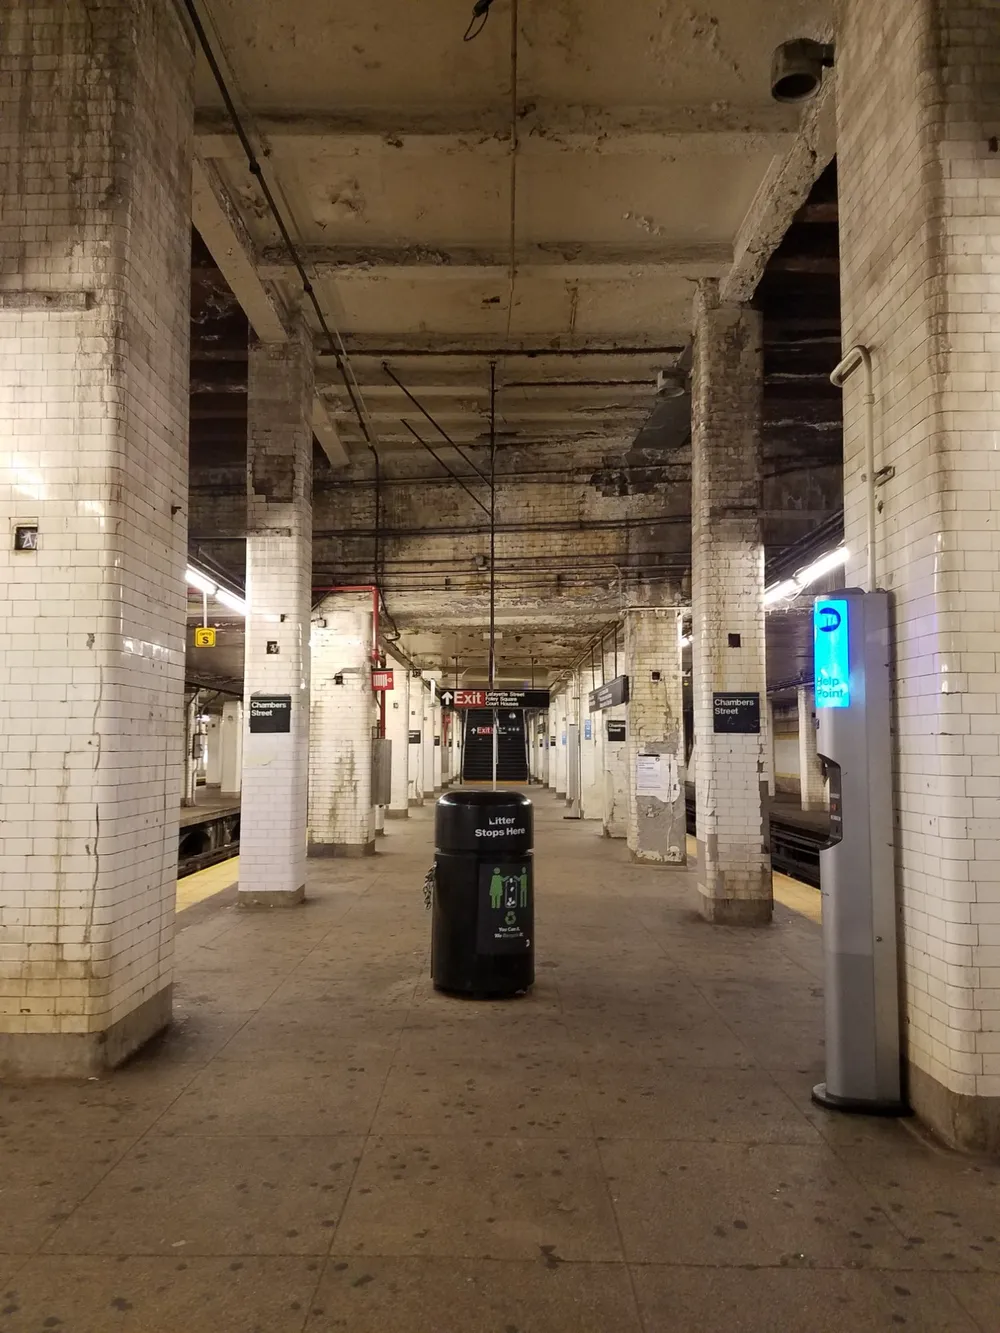 The image shows a seemingly empty aged subway station platform with white tiled walls an overhead structure exposing beams and pipes a trash bin prominently placed in the center and signage including a lit Exit sign